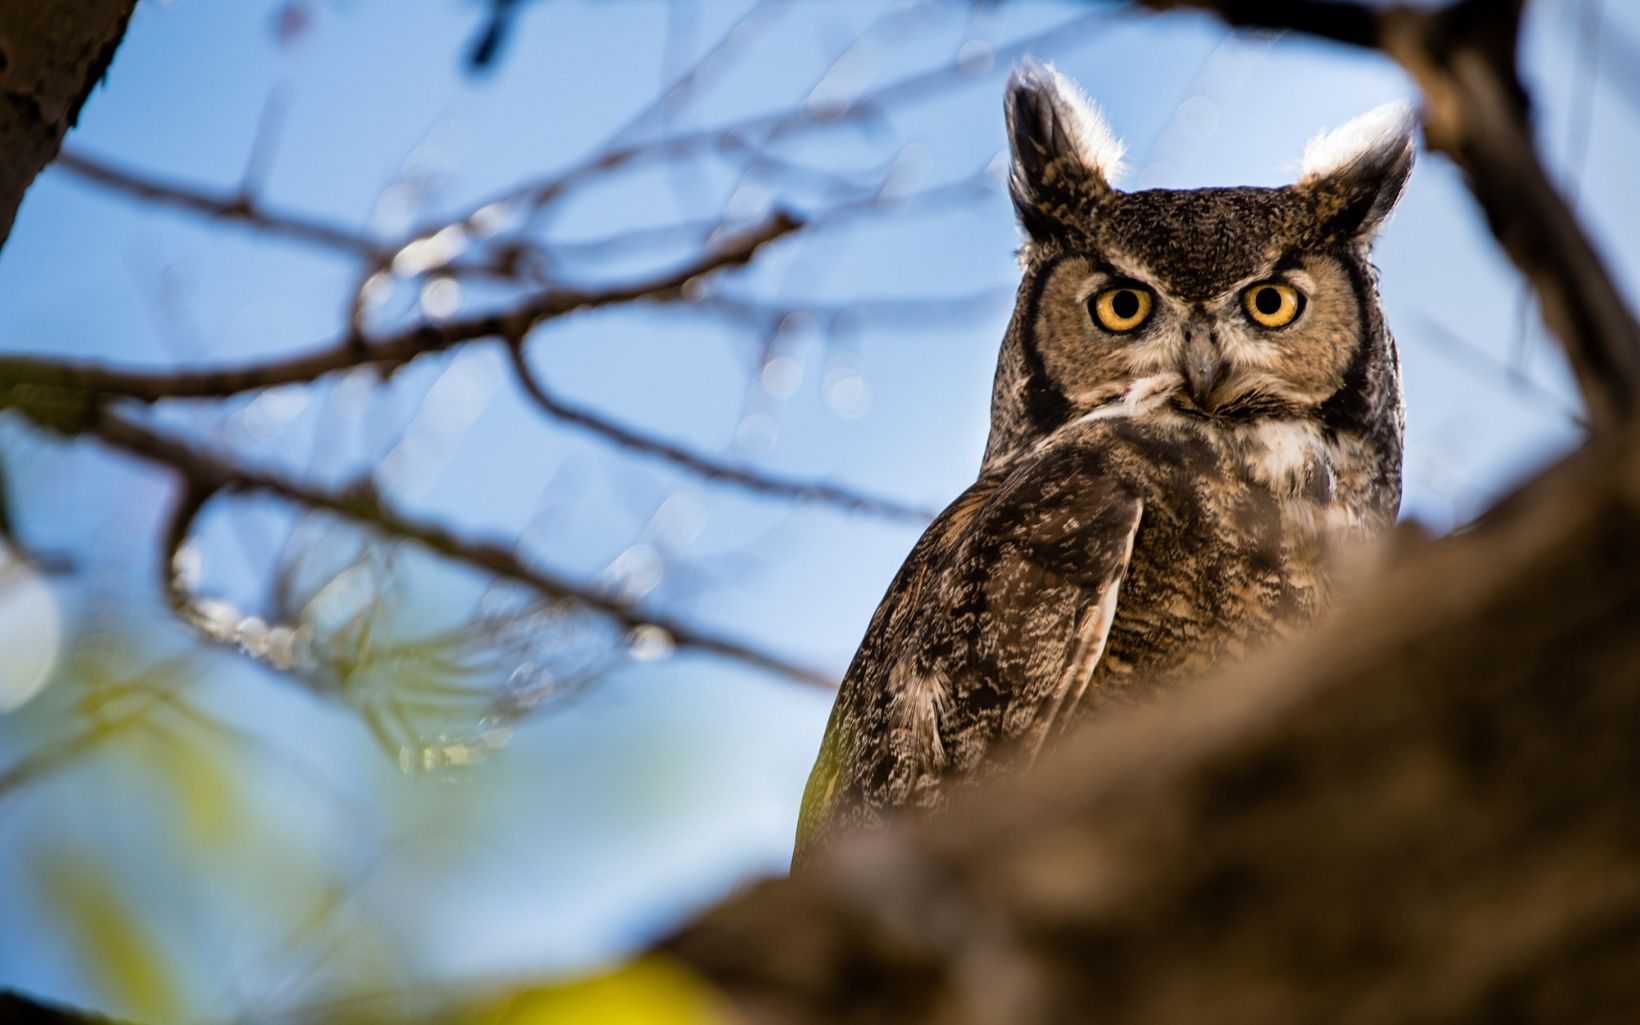  Great horned owls defy winter, beginning their courting in December and usually nesting by February.